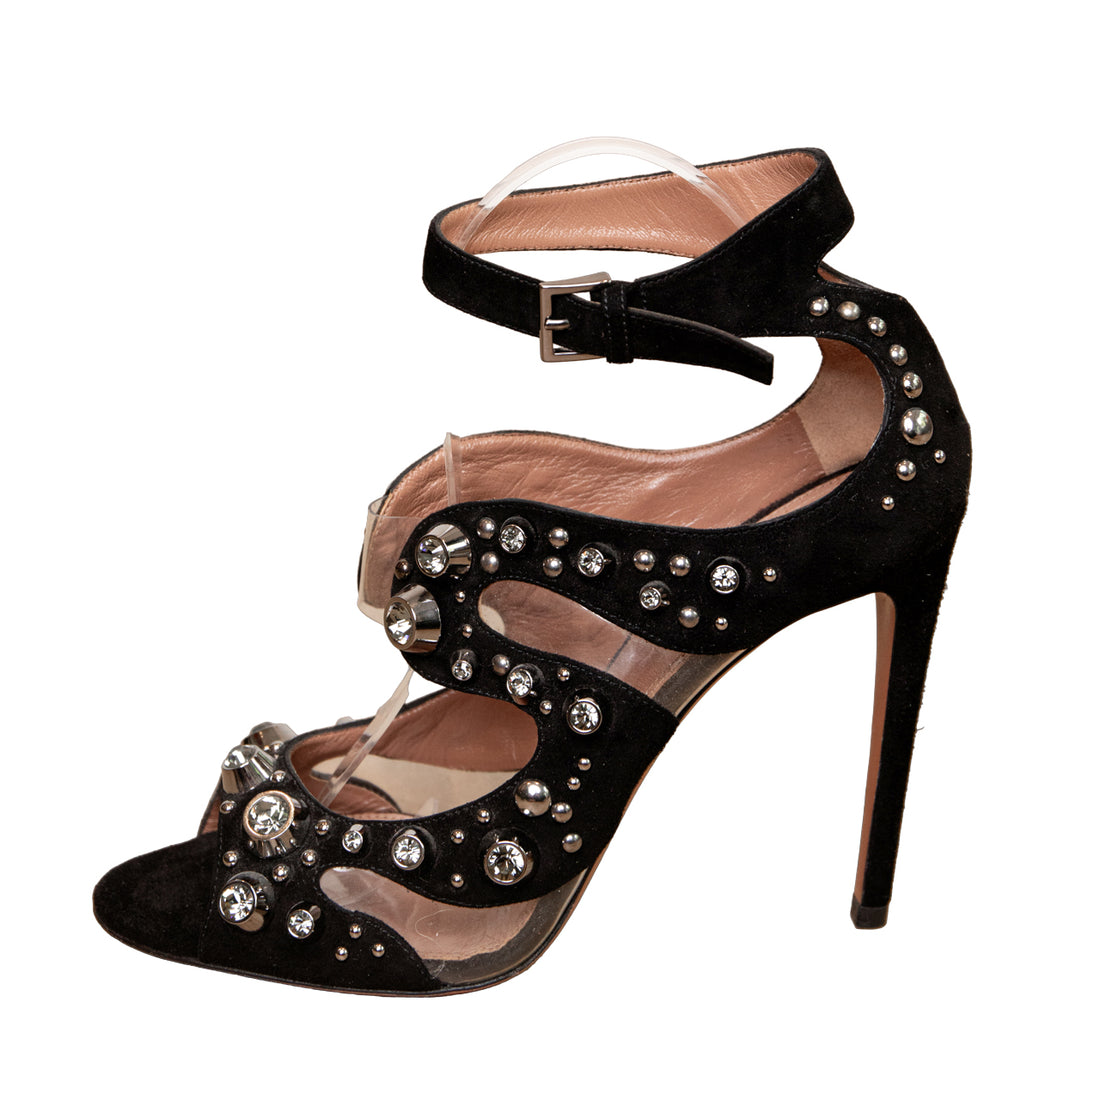 Alaïa Elaborately decorated ankle sandals with studs